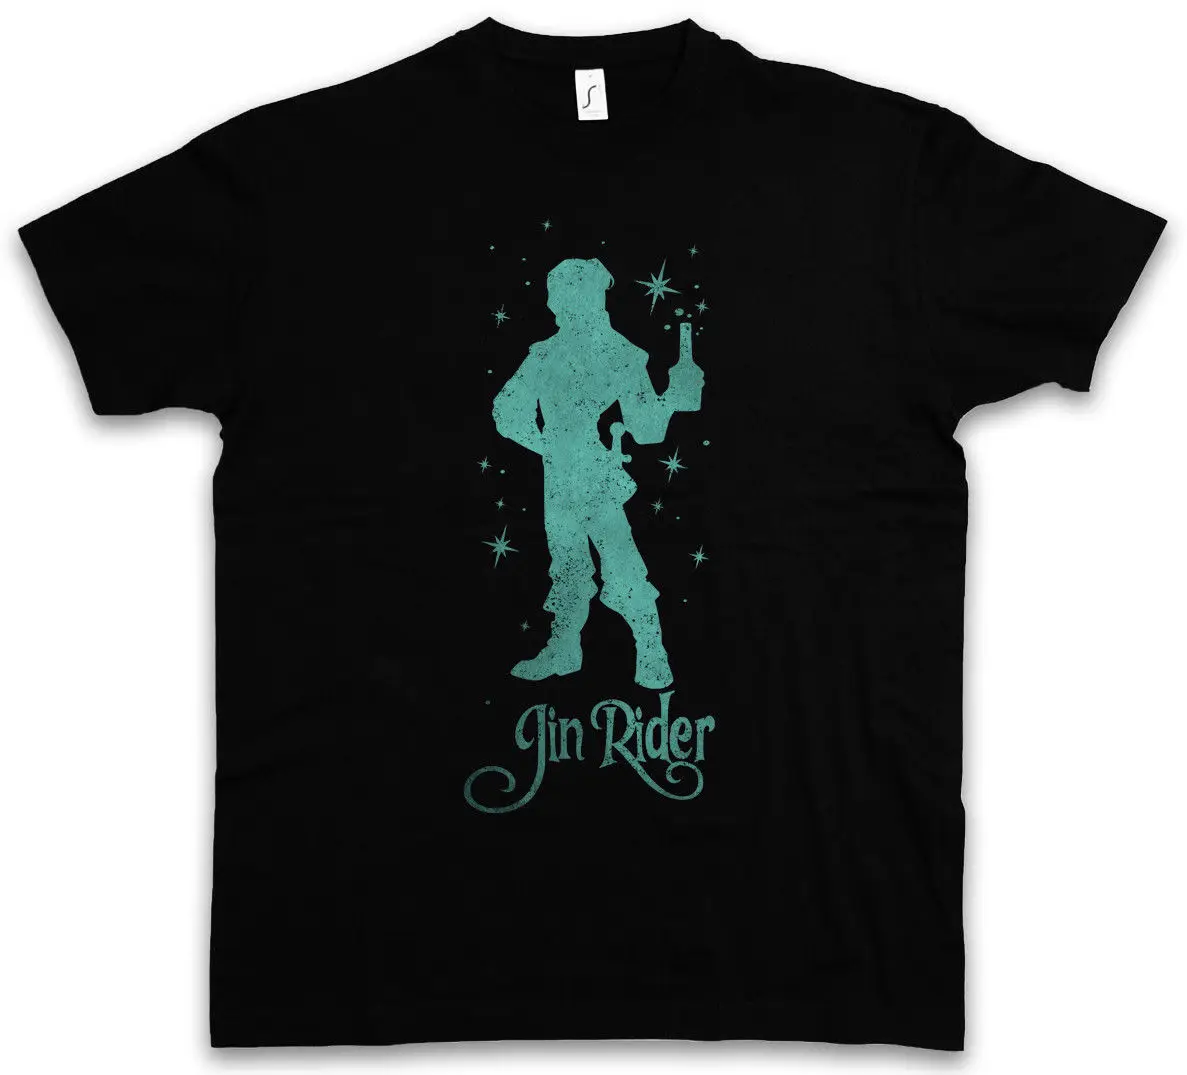 

Gin Rider T-Shirt Fun Alcohol Drunk wasted intoxicated Party drunken Hangover Men T Shirt Men Clothing Plus Size top tee